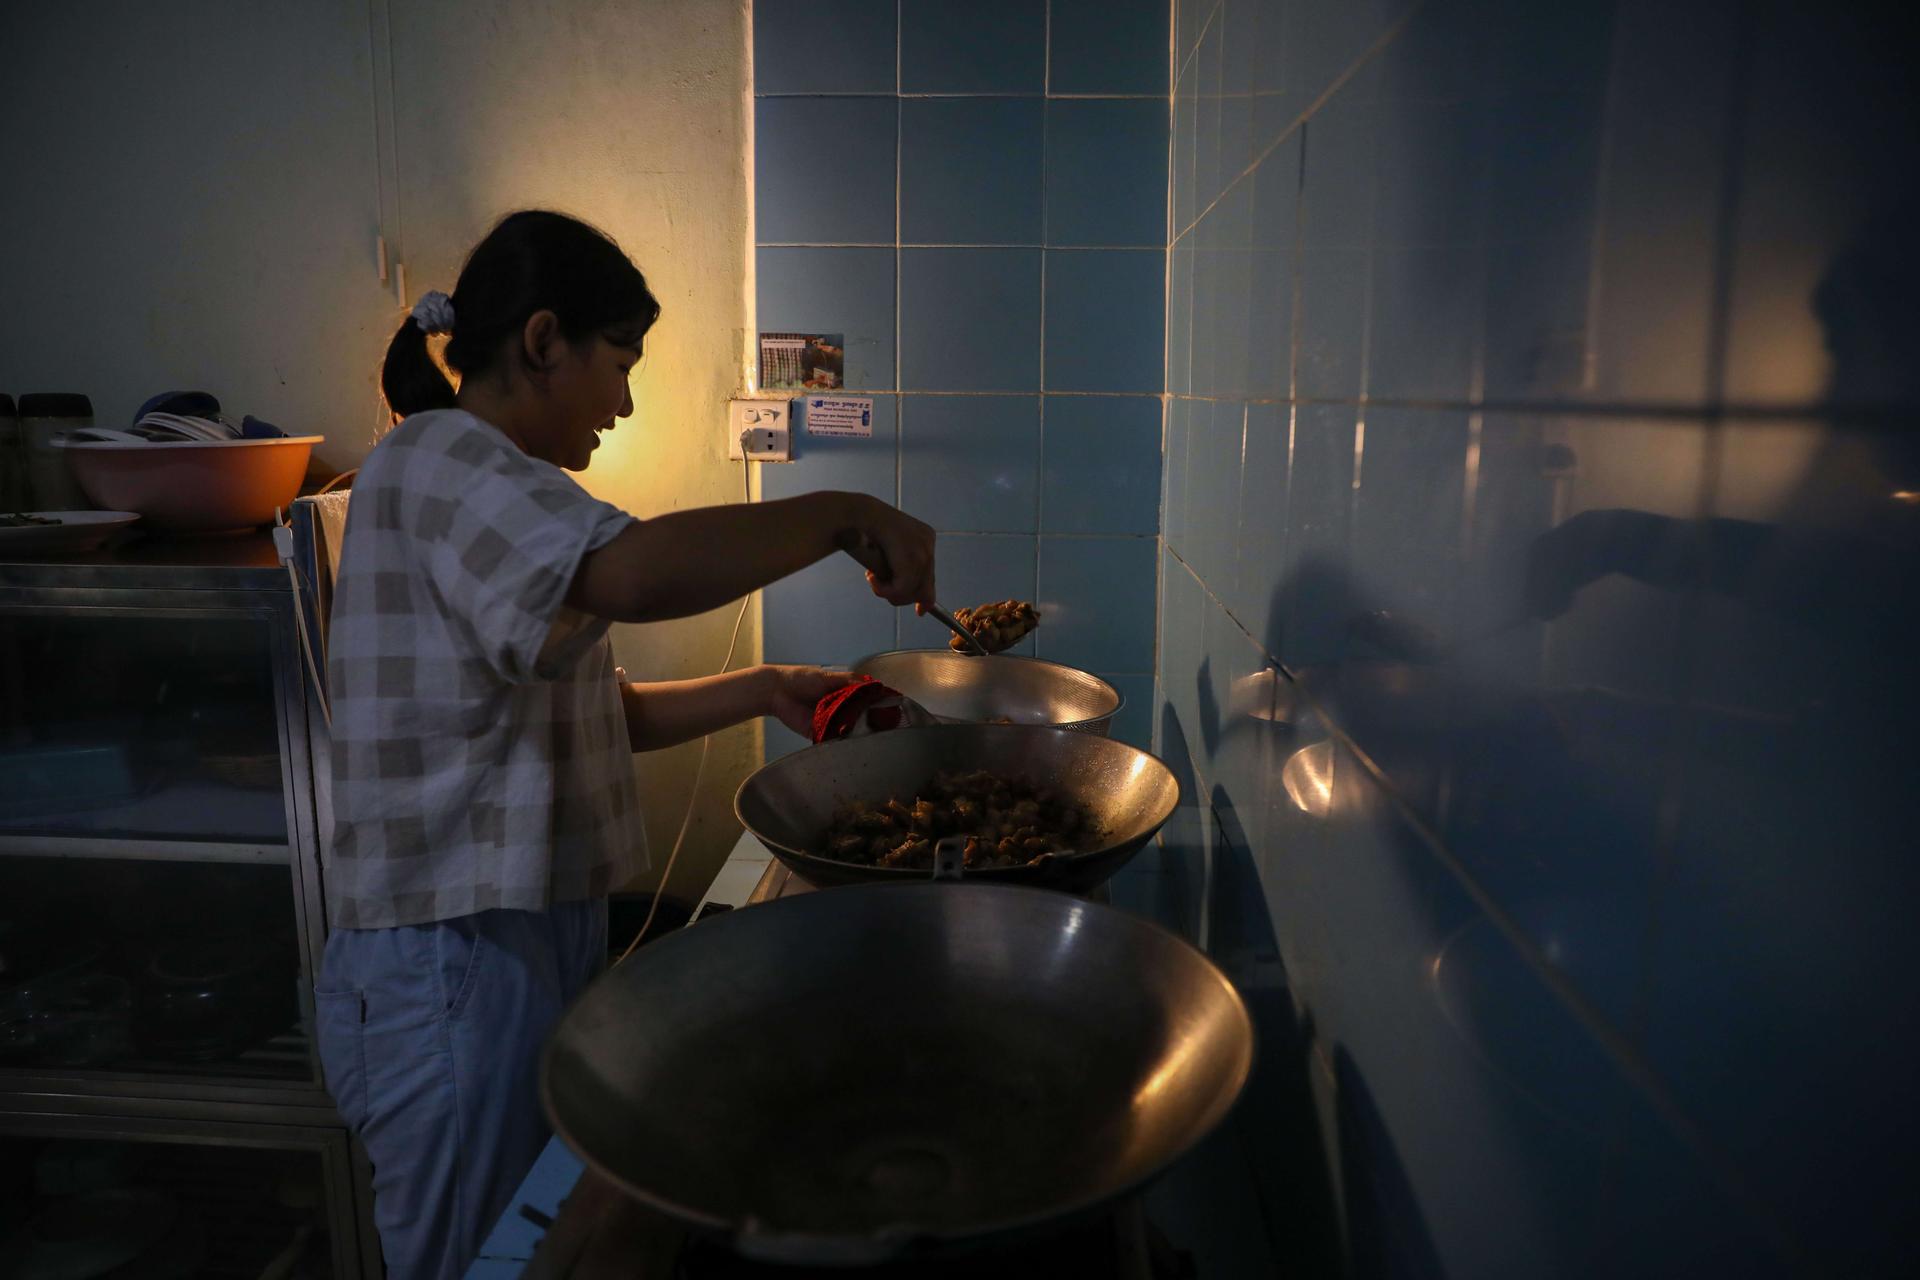 A woman seen cooking in a dimly lit kitchen, handling a wok